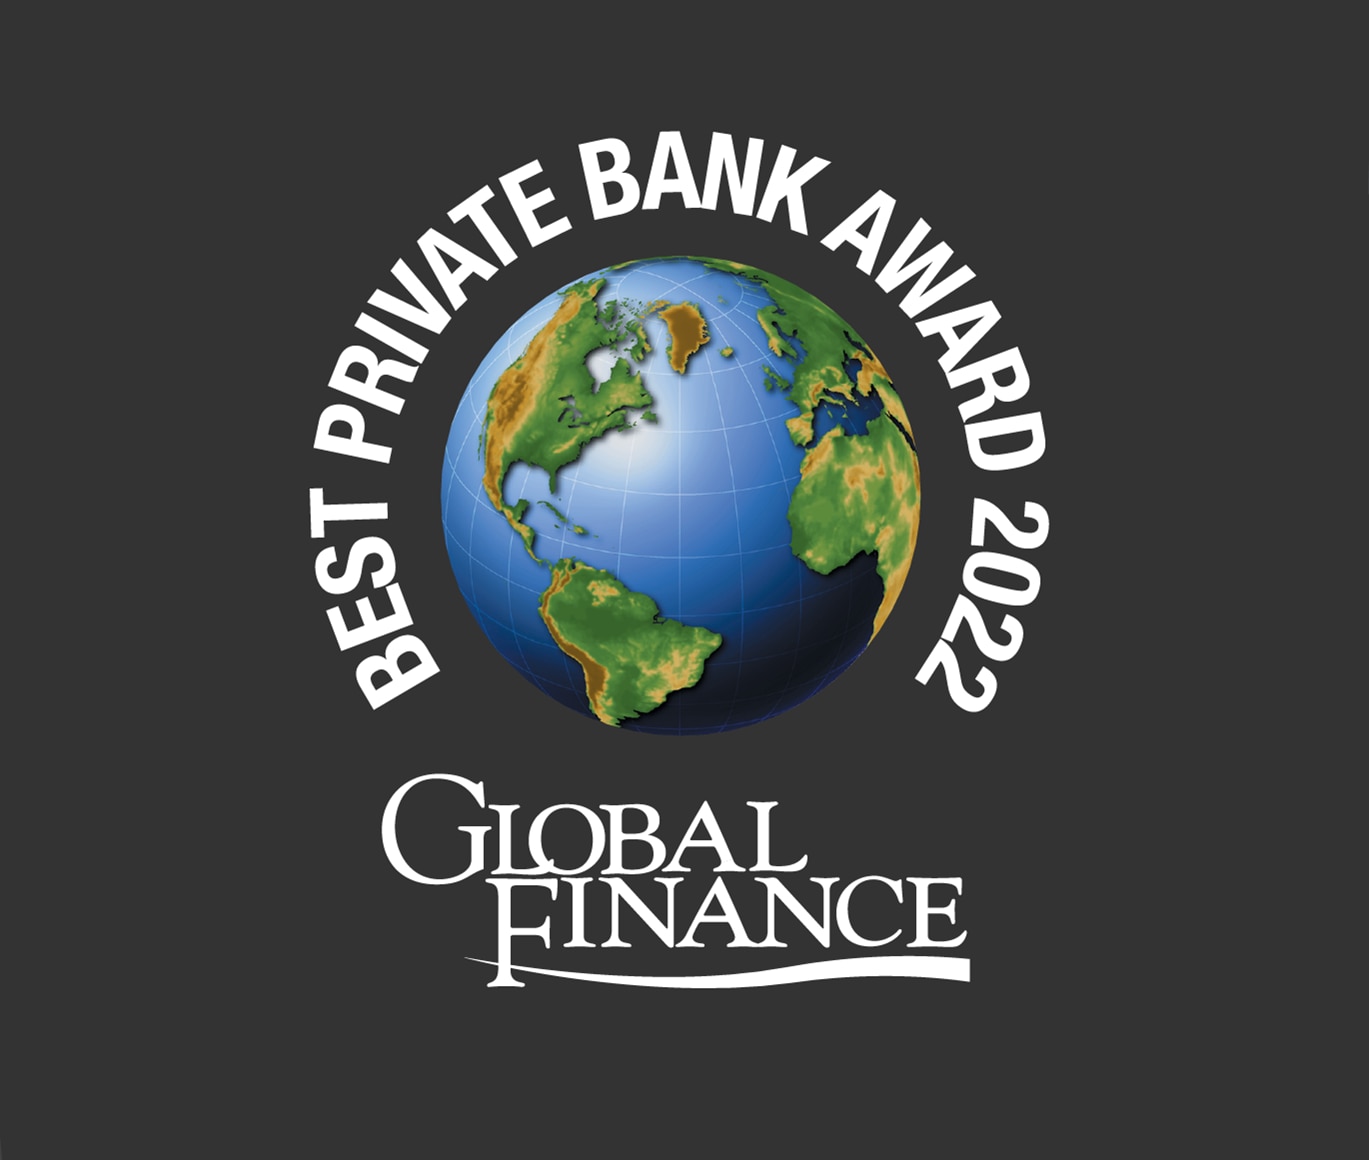 Global Finance: Best Private banking award 2022 